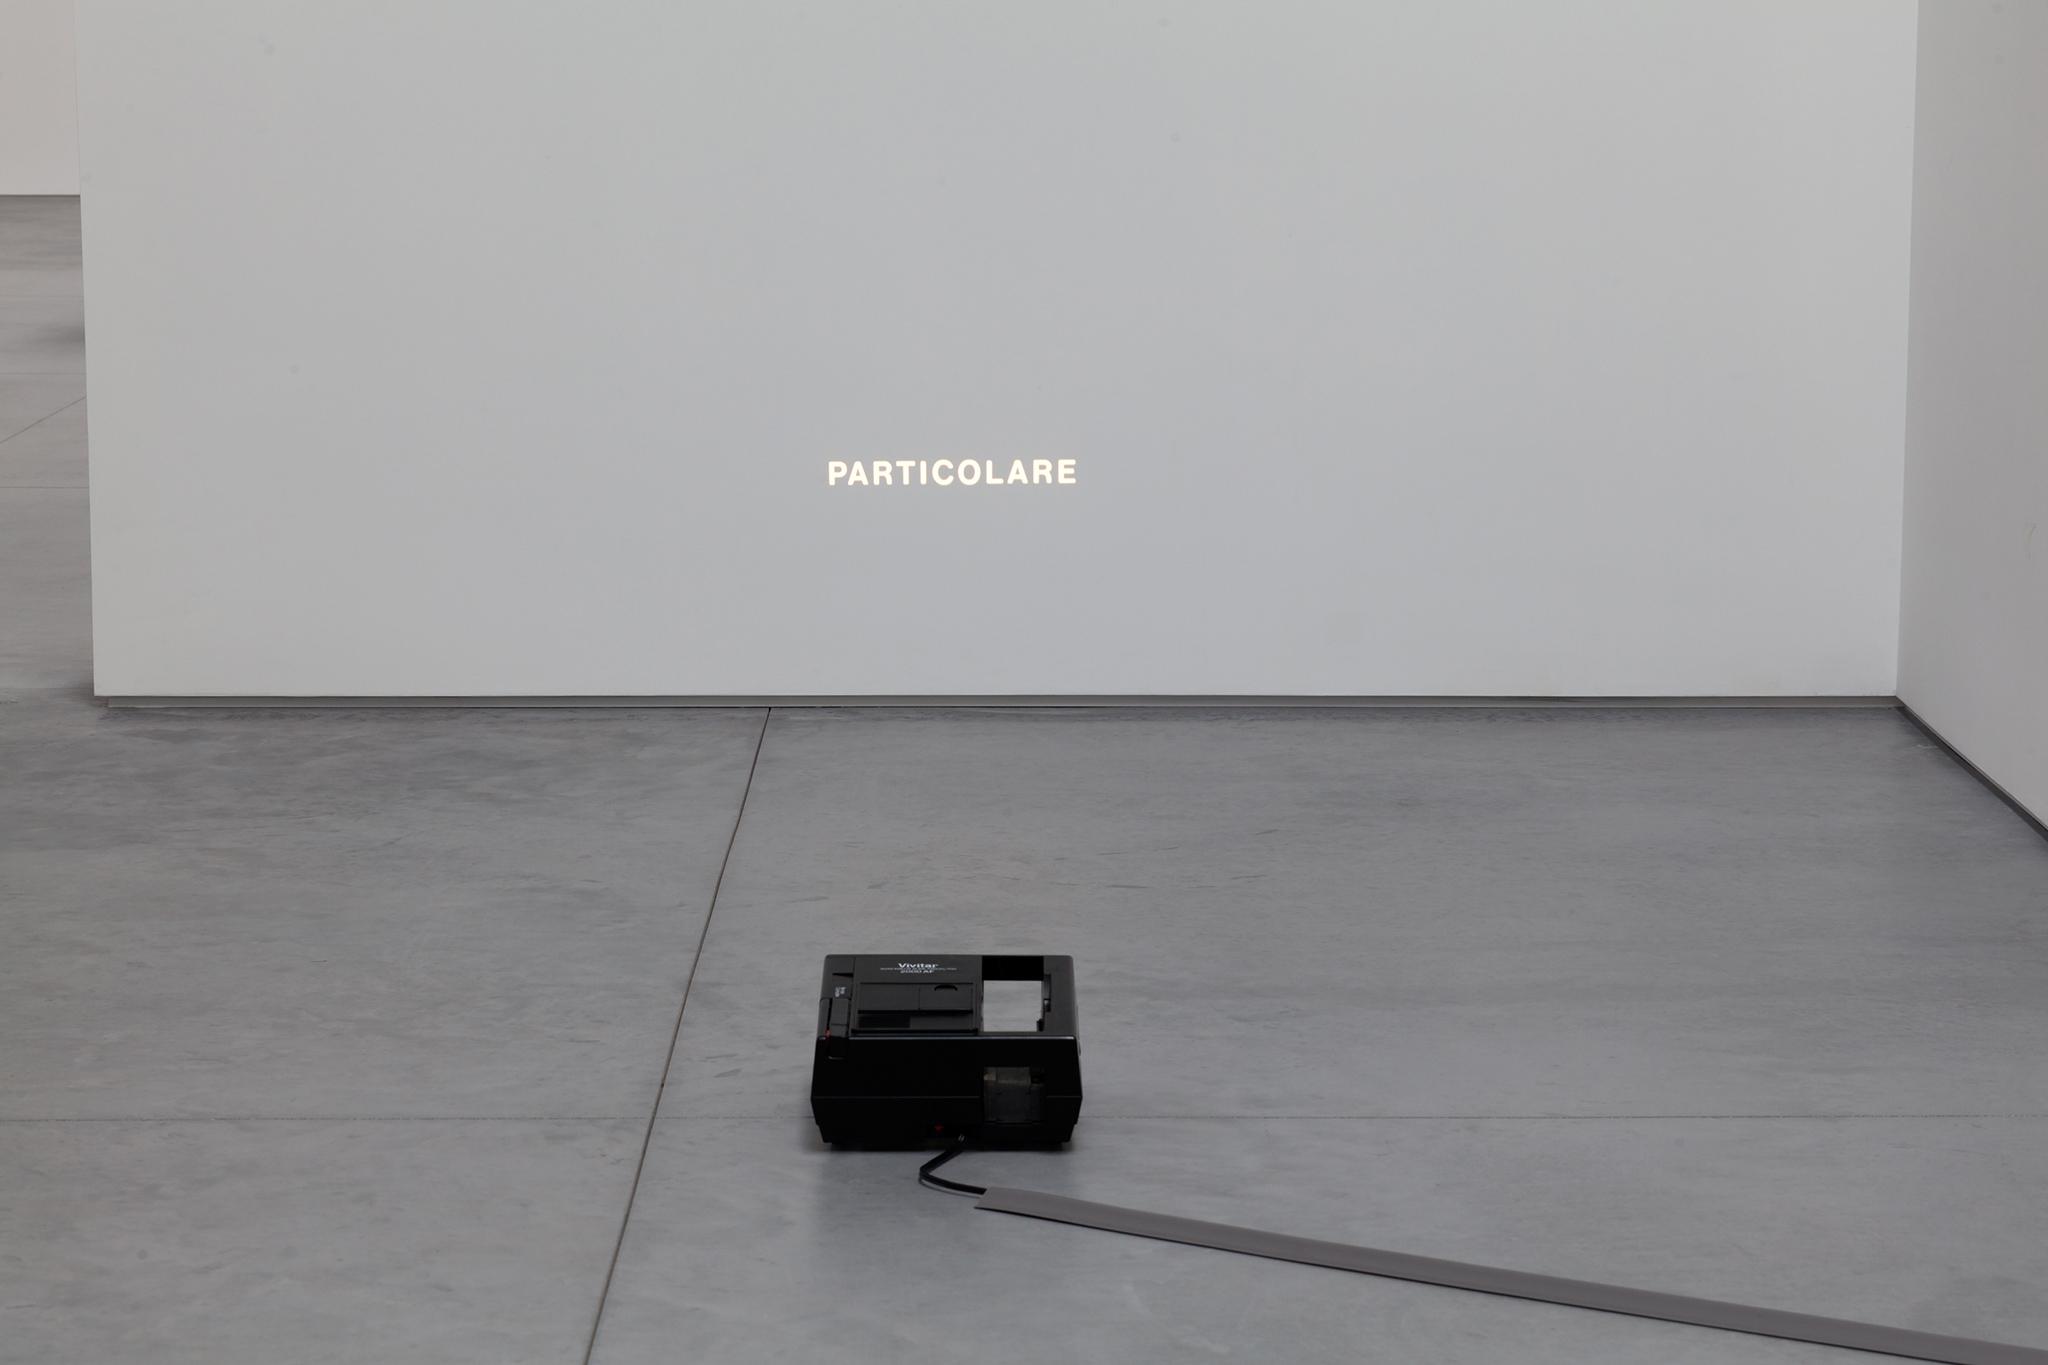 a slide projector sitting the floor projecting the word particolare onto a white wall